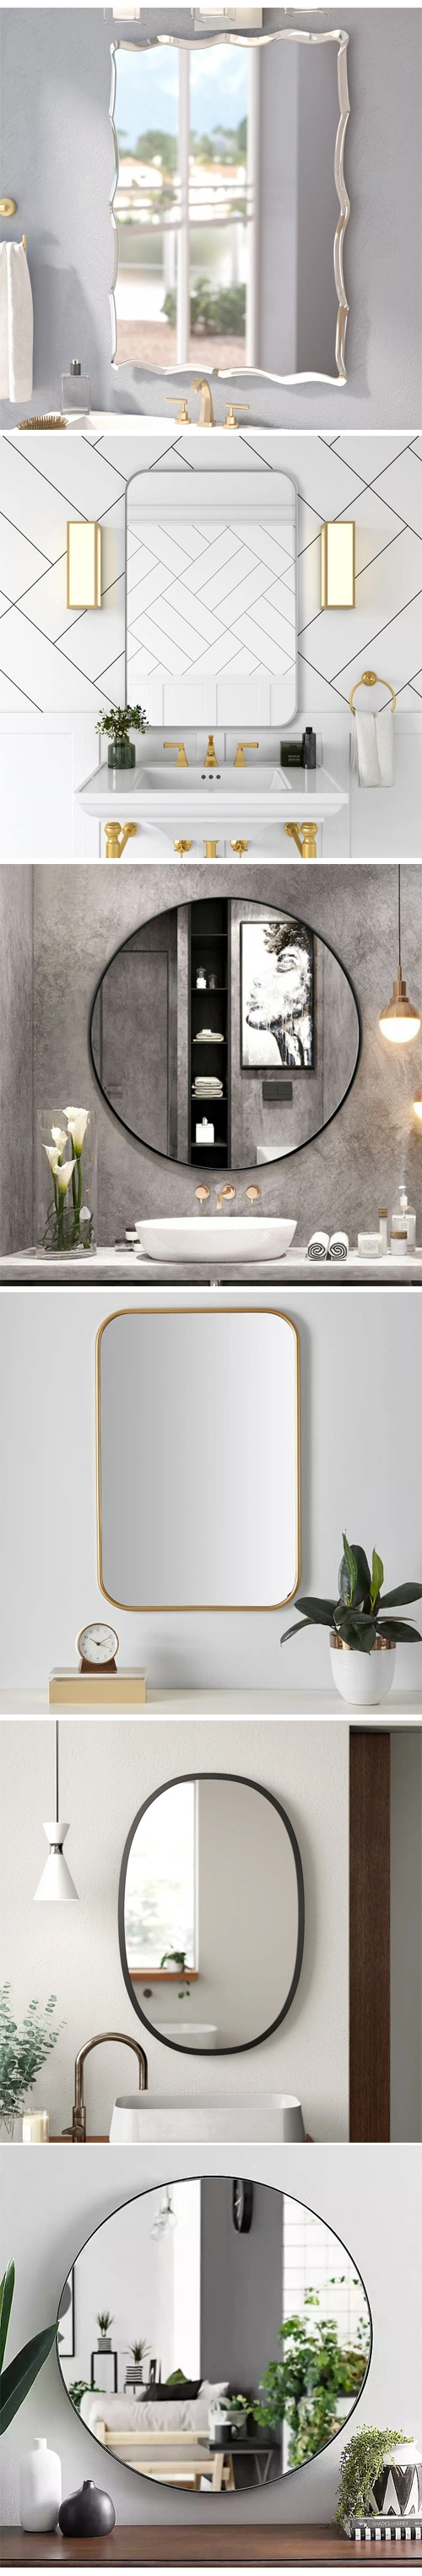 Ortonbath Half Circle Moon Black Framed Wall Hung Mirror LED Lights Touch Sensor Switch Backlit Bathroom Vanity Cabinet Compact Mirror Without LED